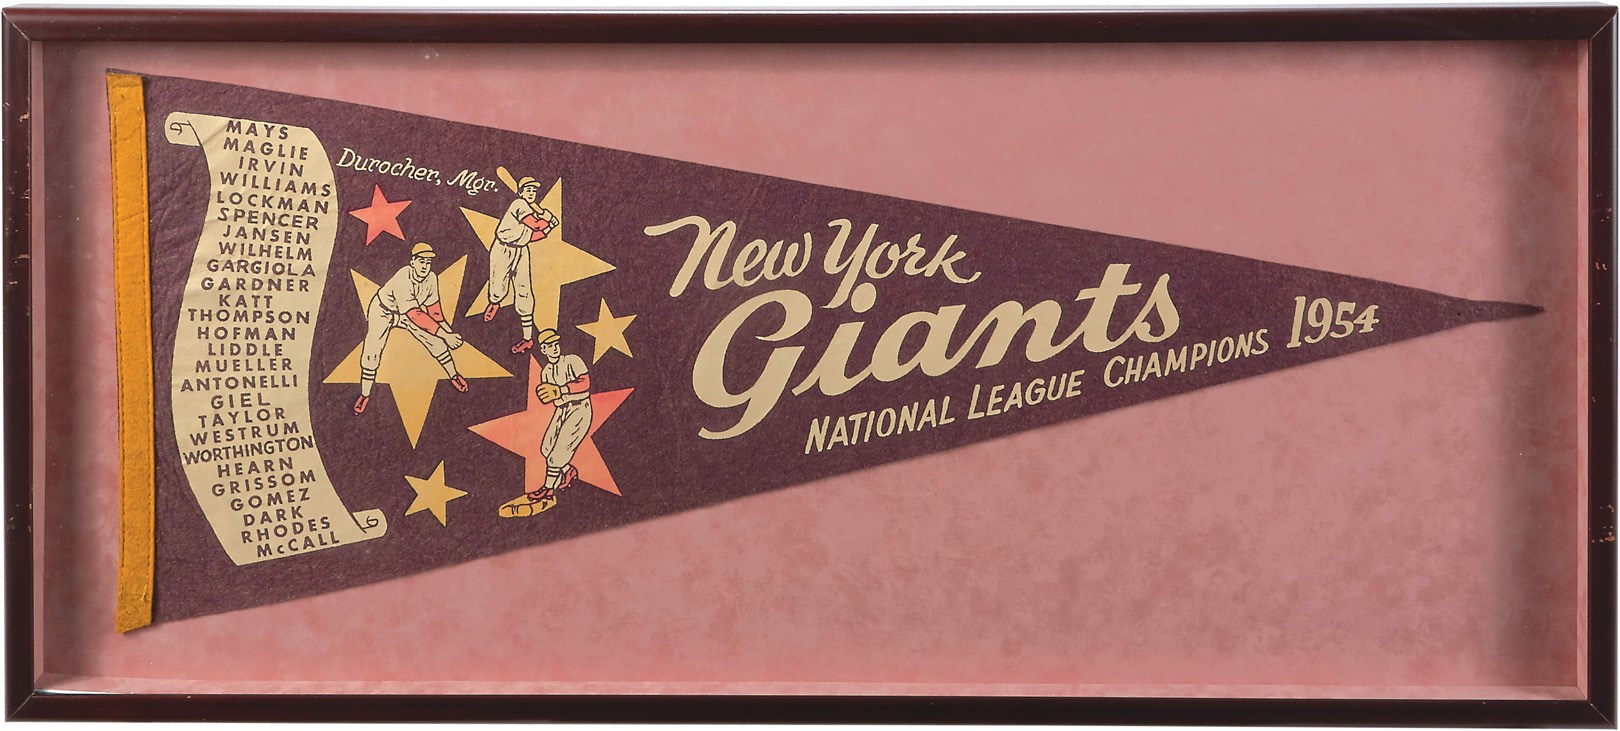 NY Yankees, Giants & Mets - 1900s-70s Vintage Sport Pennant Collection w/Yankees & Dodgers (7)